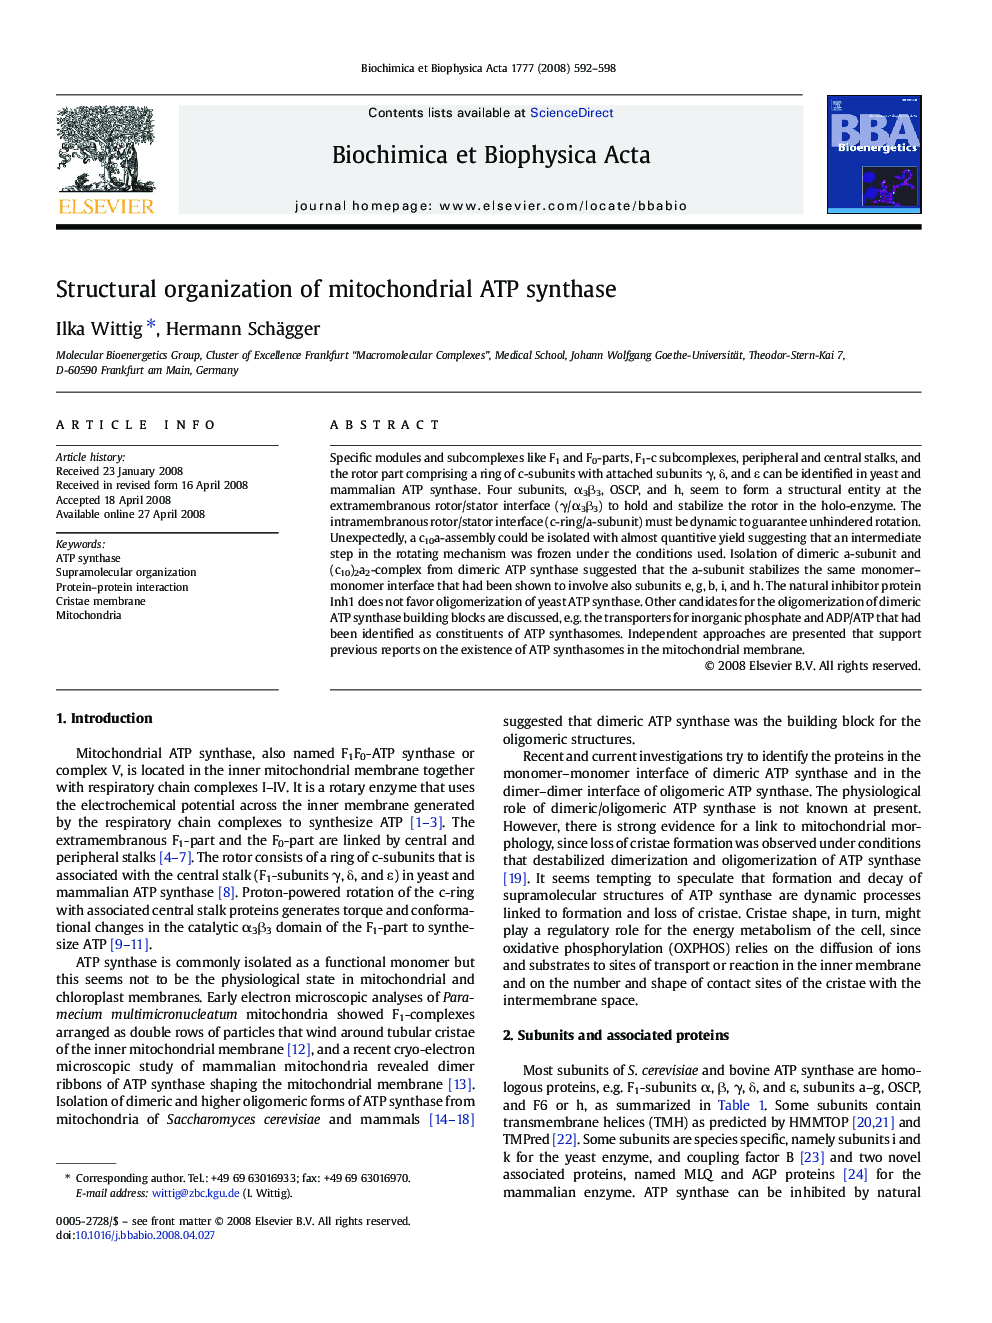 Structural organization of mitochondrial ATP synthase